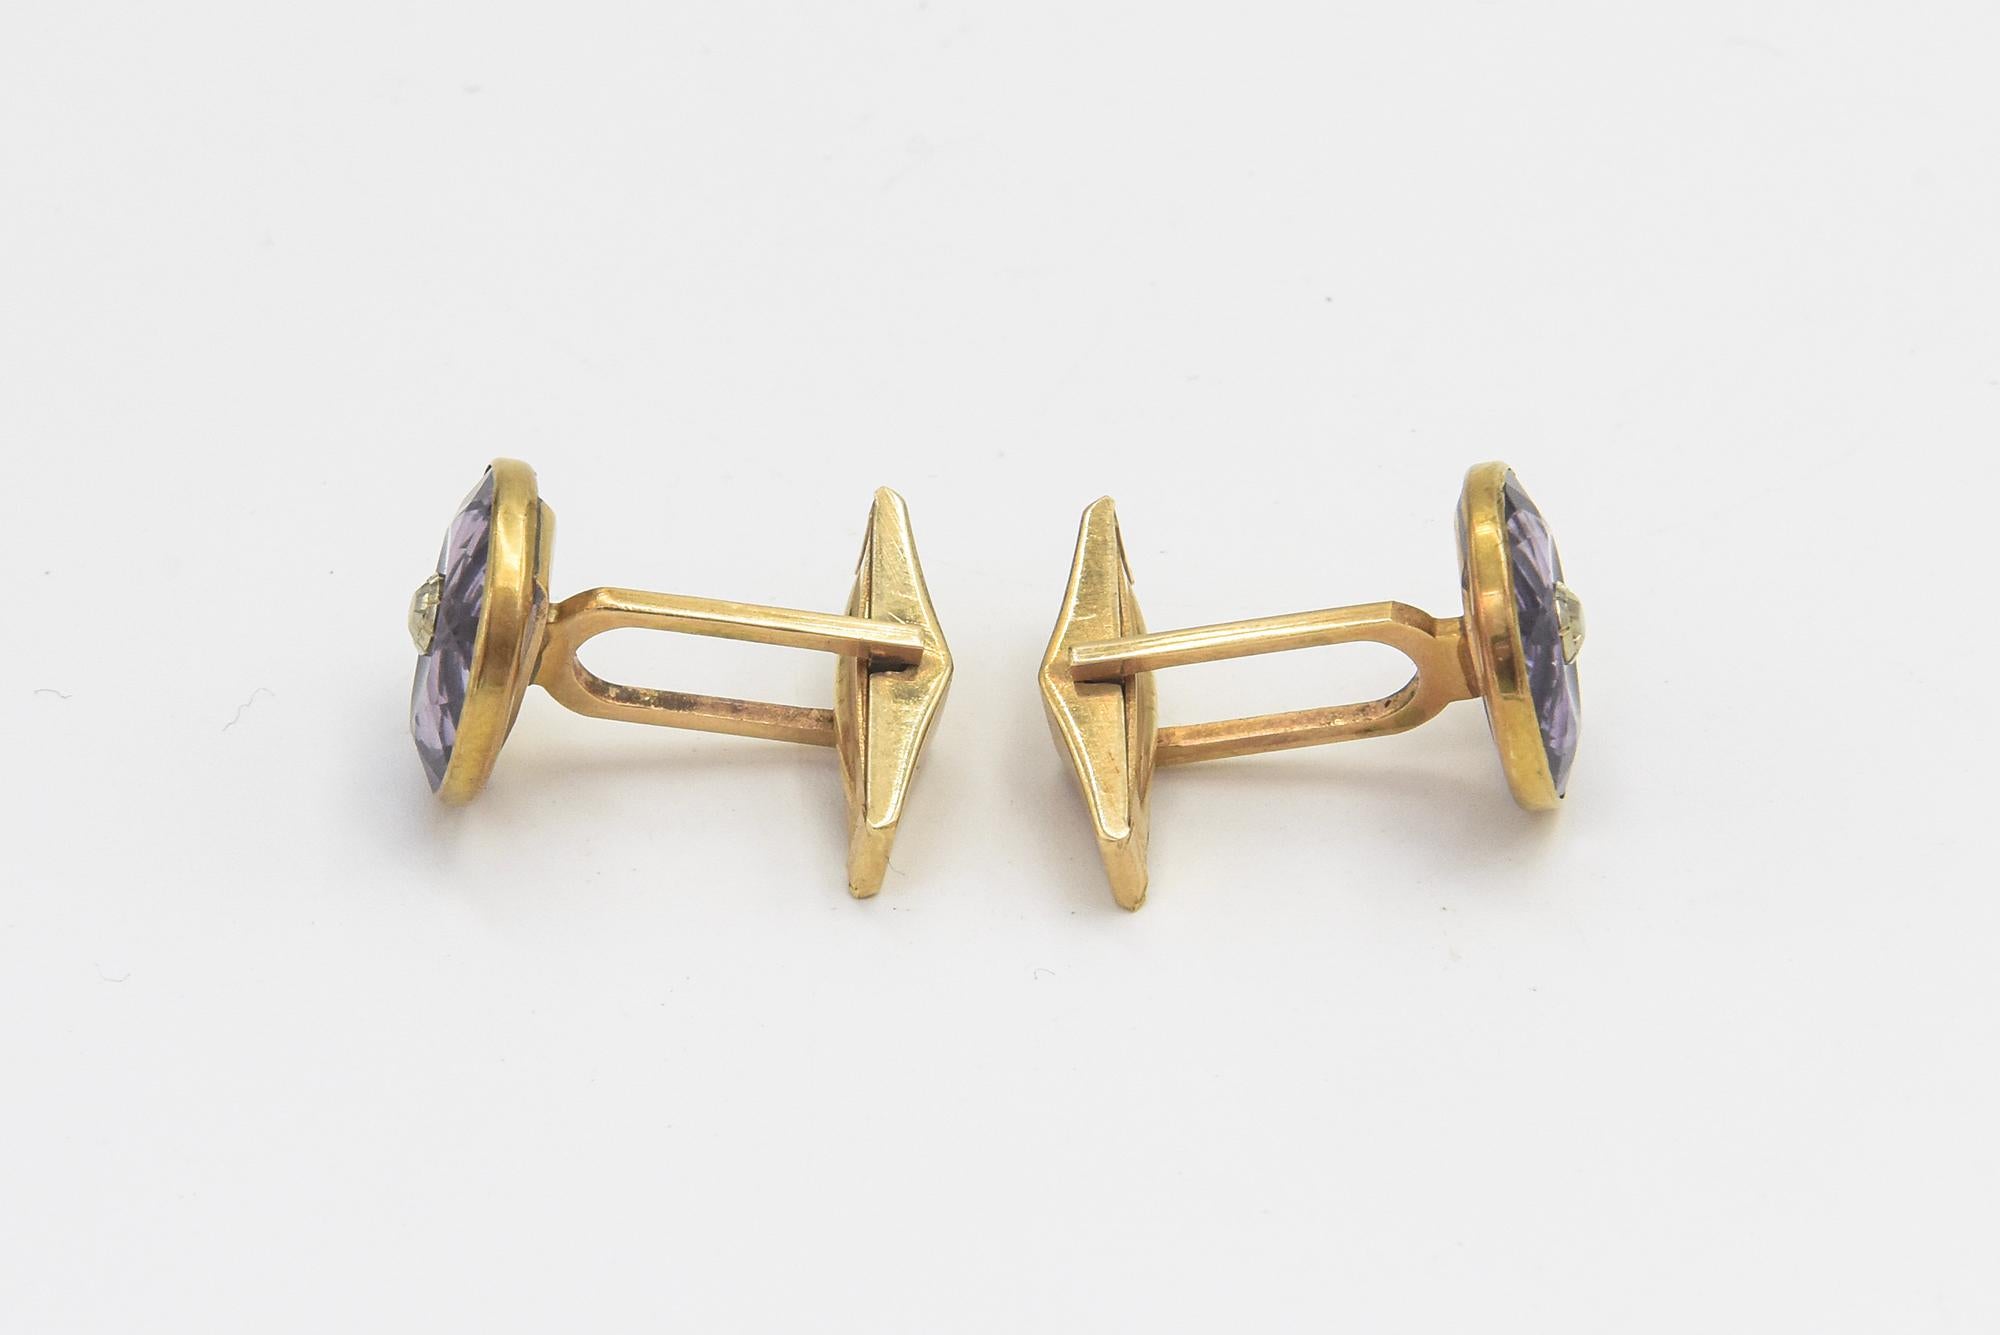 Antique Arts & Crafts Amethyst and Gold Cufflinks In Good Condition For Sale In Miami Beach, FL